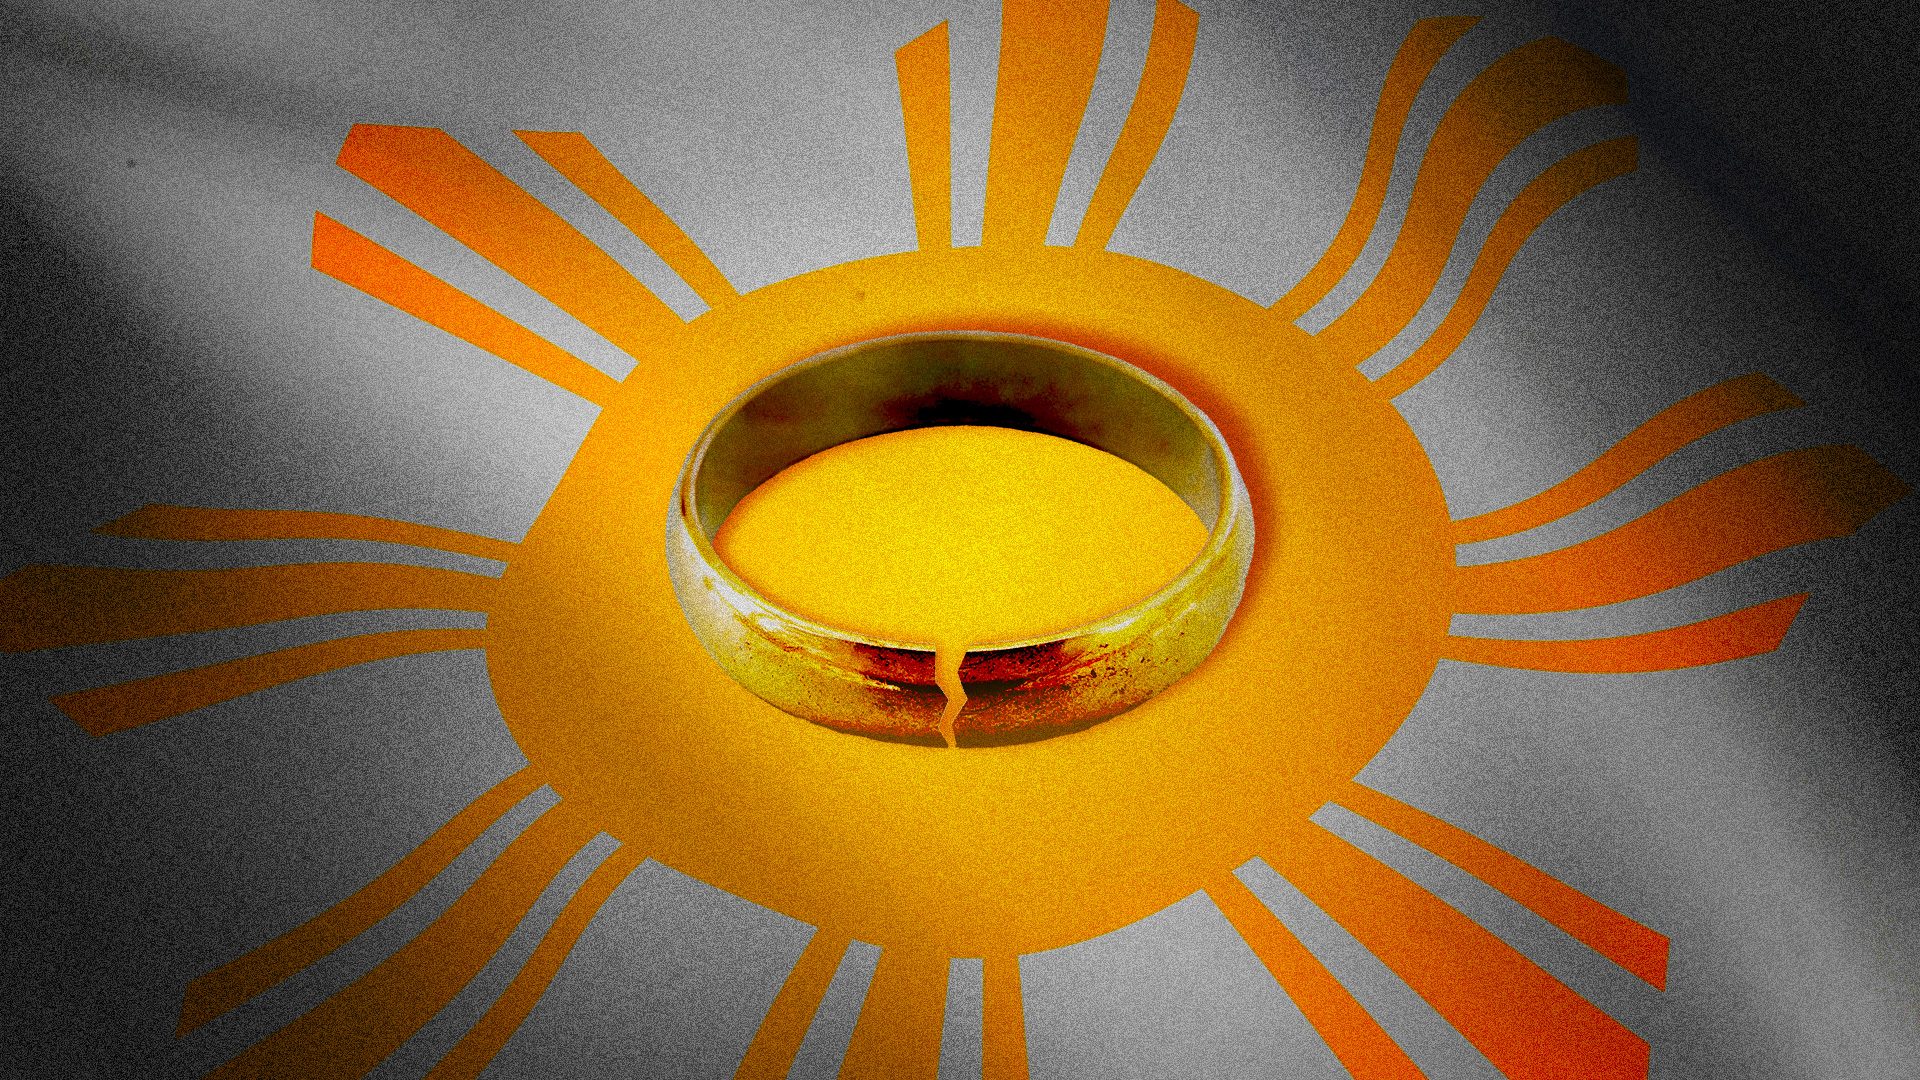 [OPINION] On divorce and Filipino values